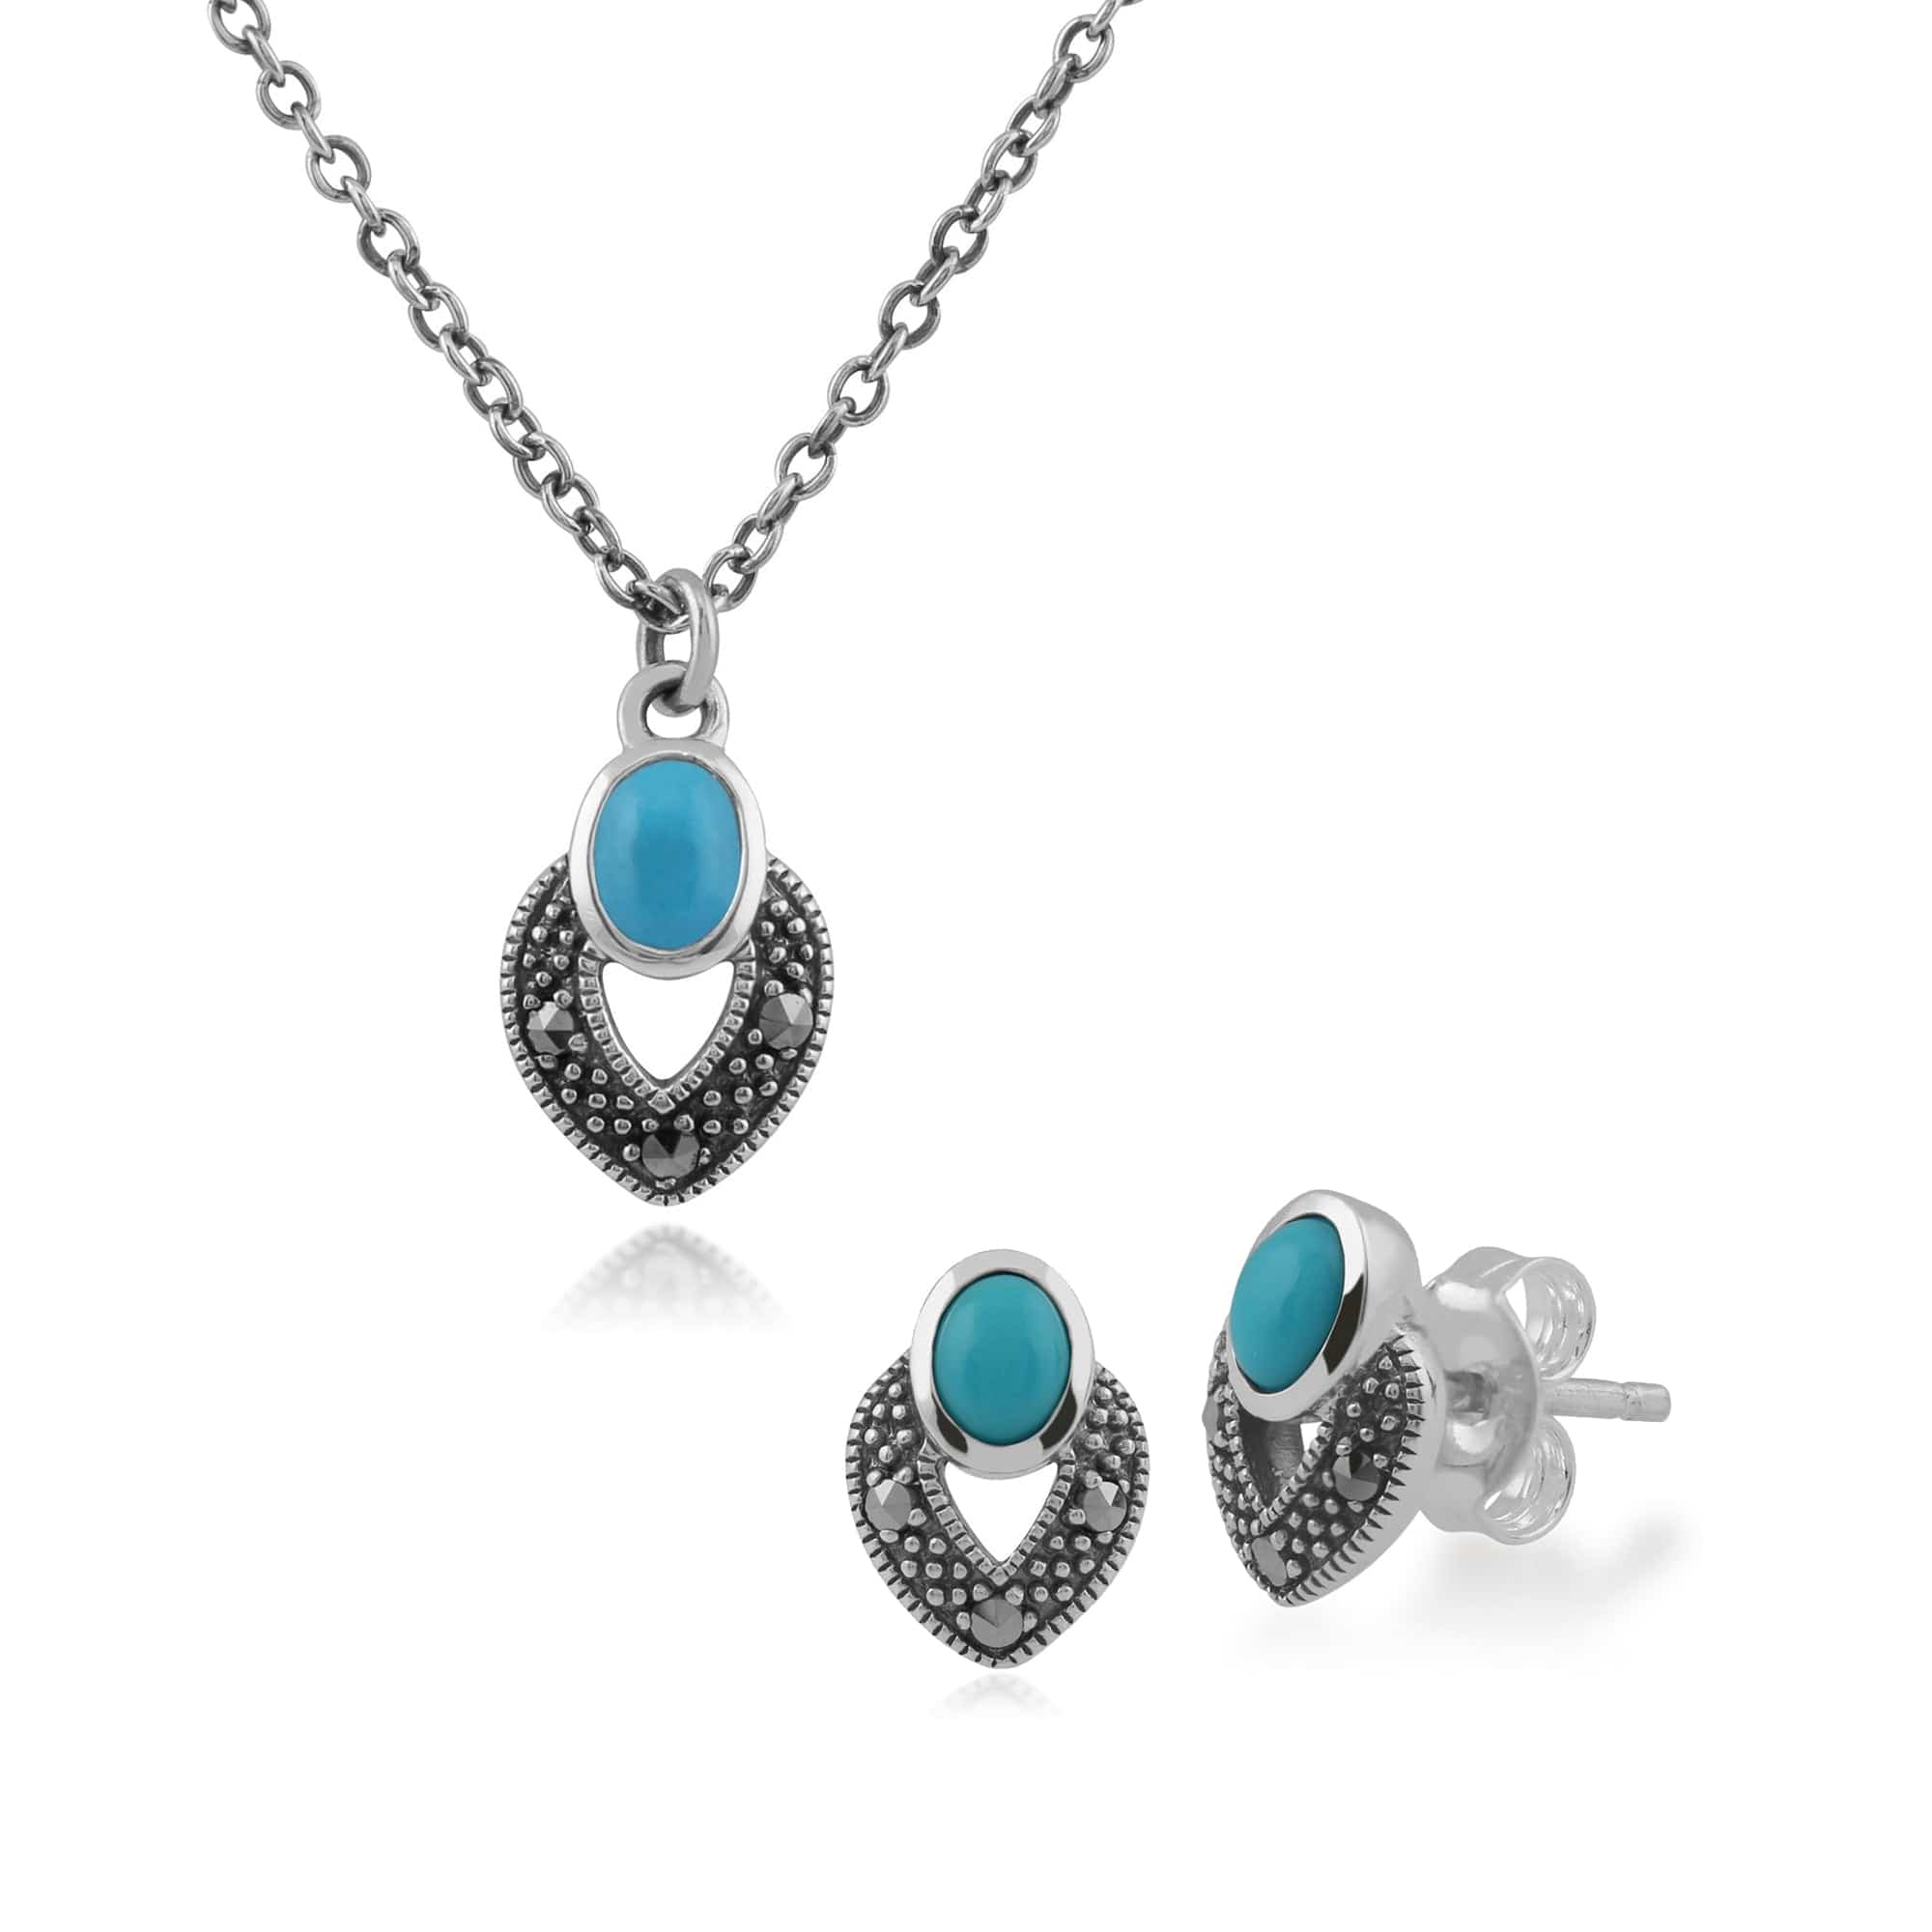 214E850102925-214N688202925 Art Deco Style Oval Turquoise & Marcasite Stud Earrings & Pendant Set in Sterling Silver 1